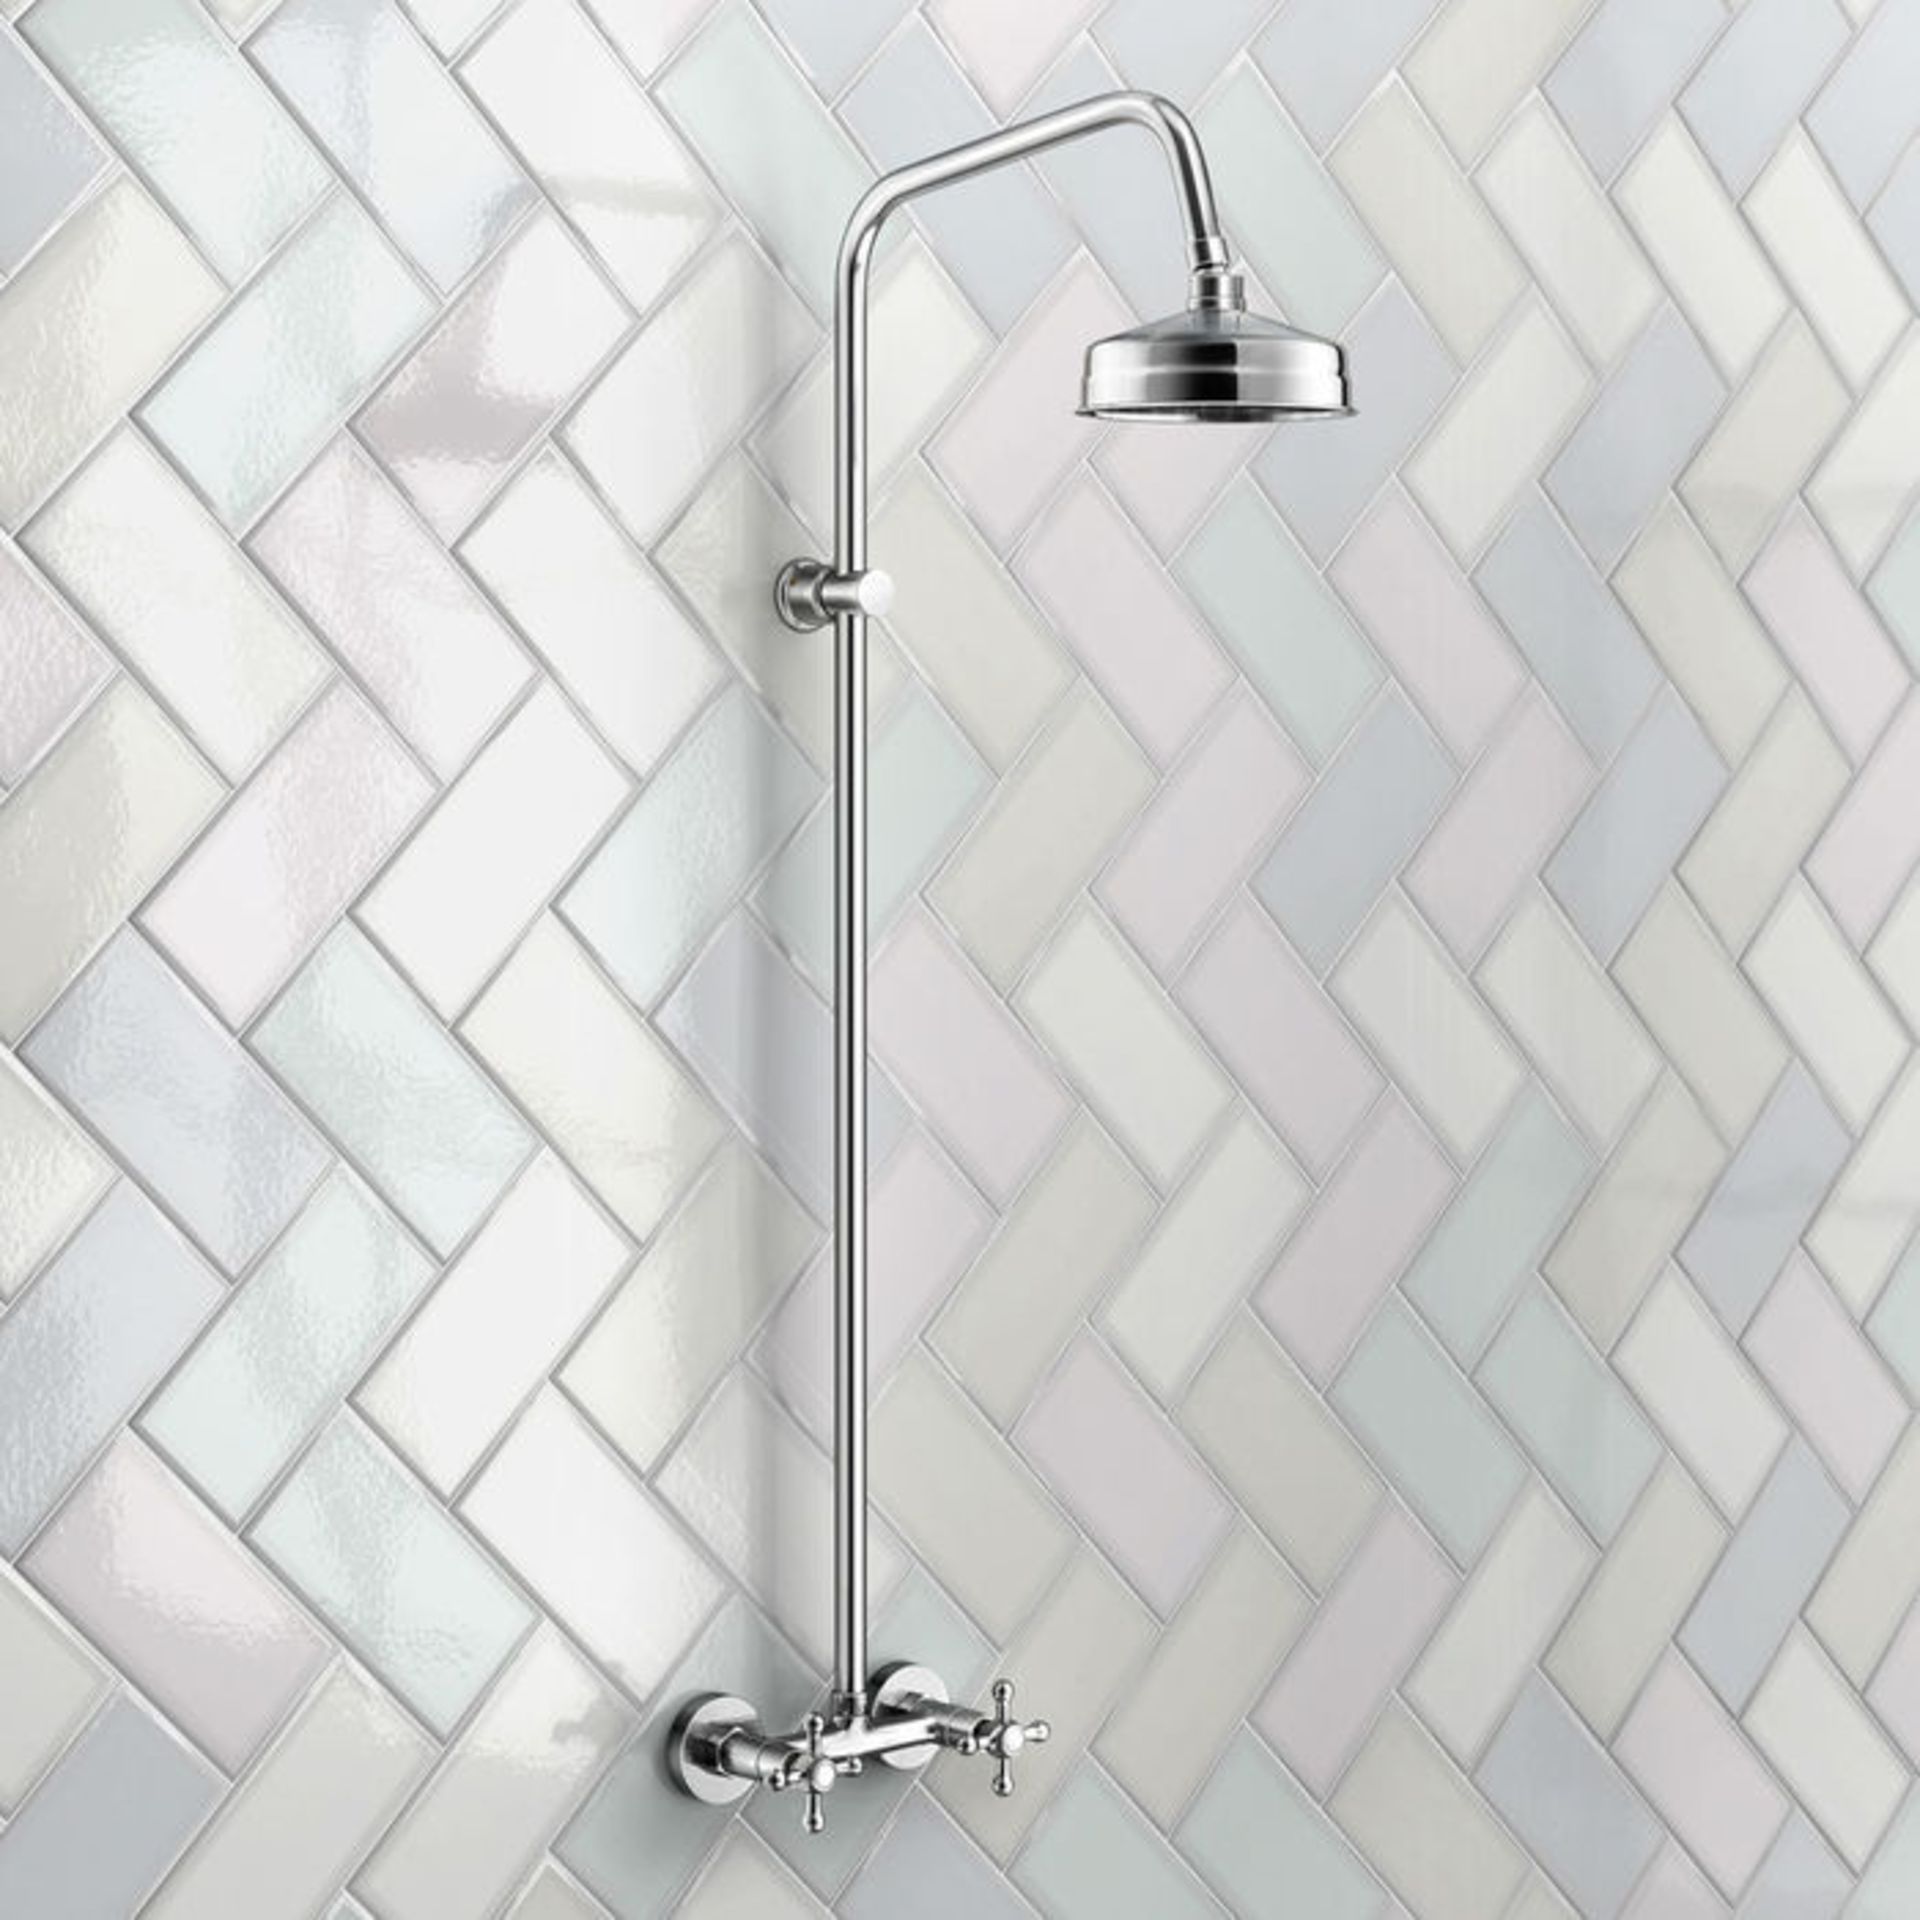 (P90) Traditional Exposed Shower Medium Head Exposed design makes for a statement piece Stunning - Image 3 of 3